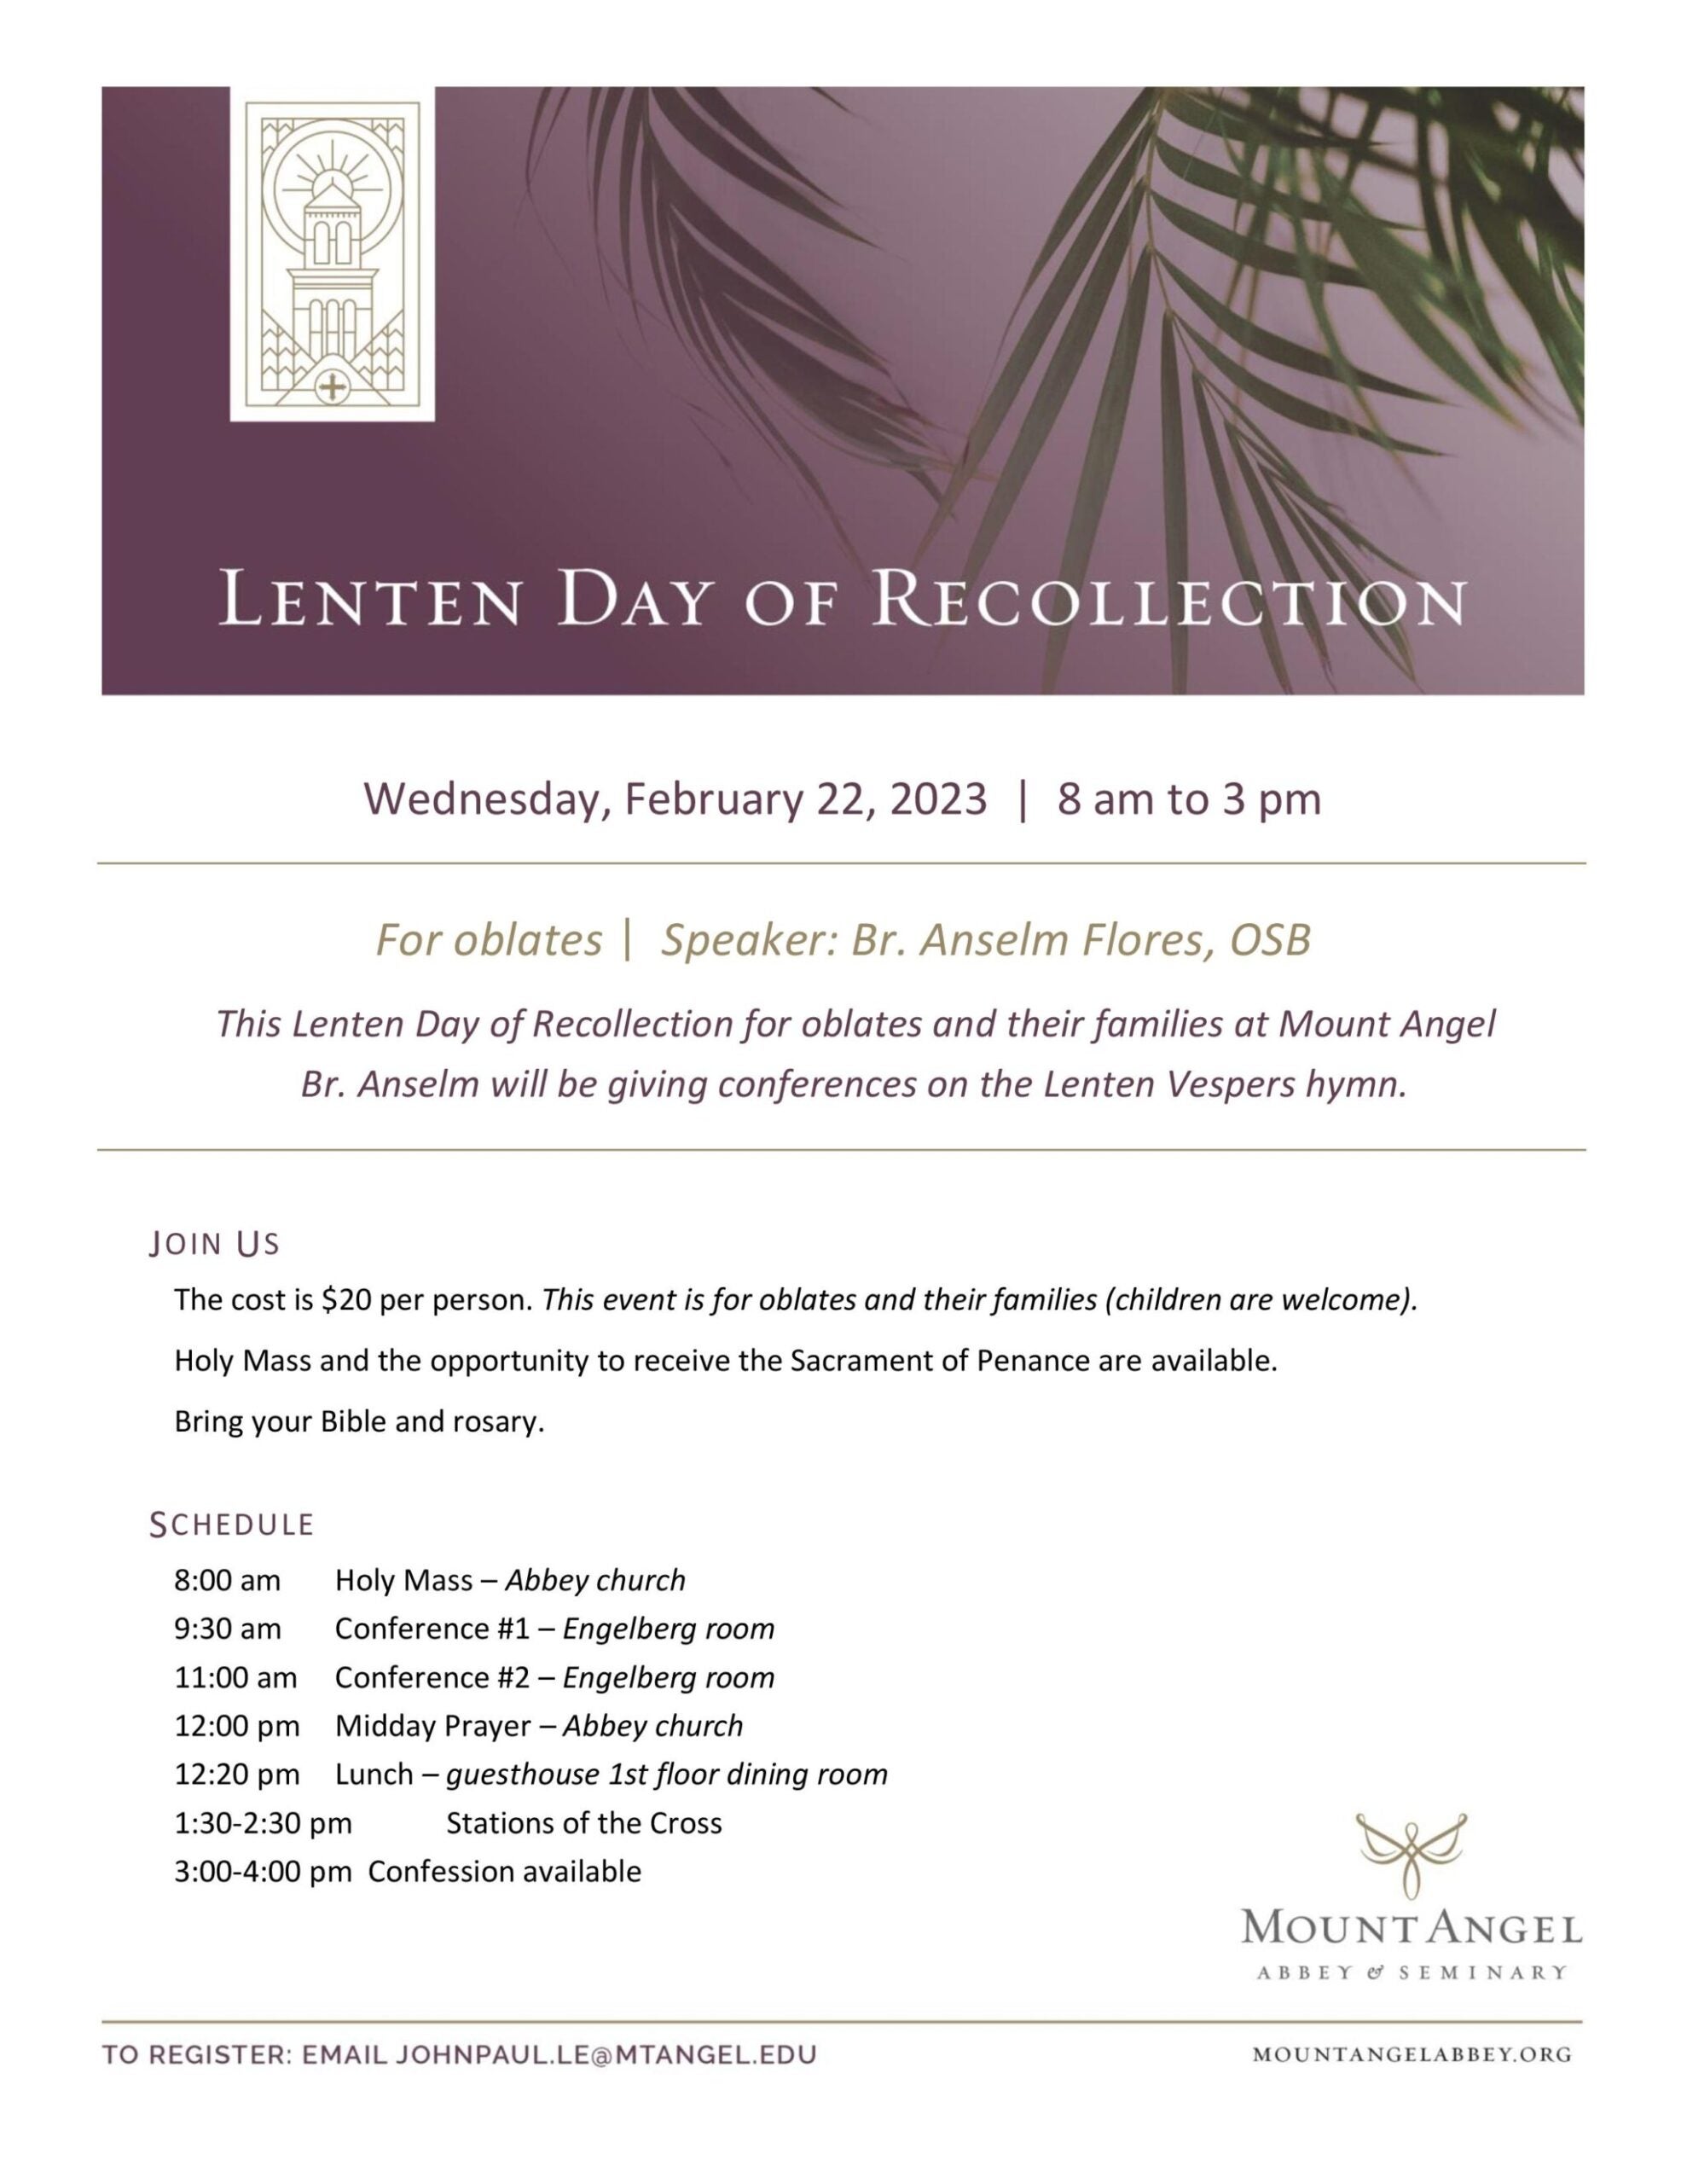 Oblate Lenten Day of Recollection 2023